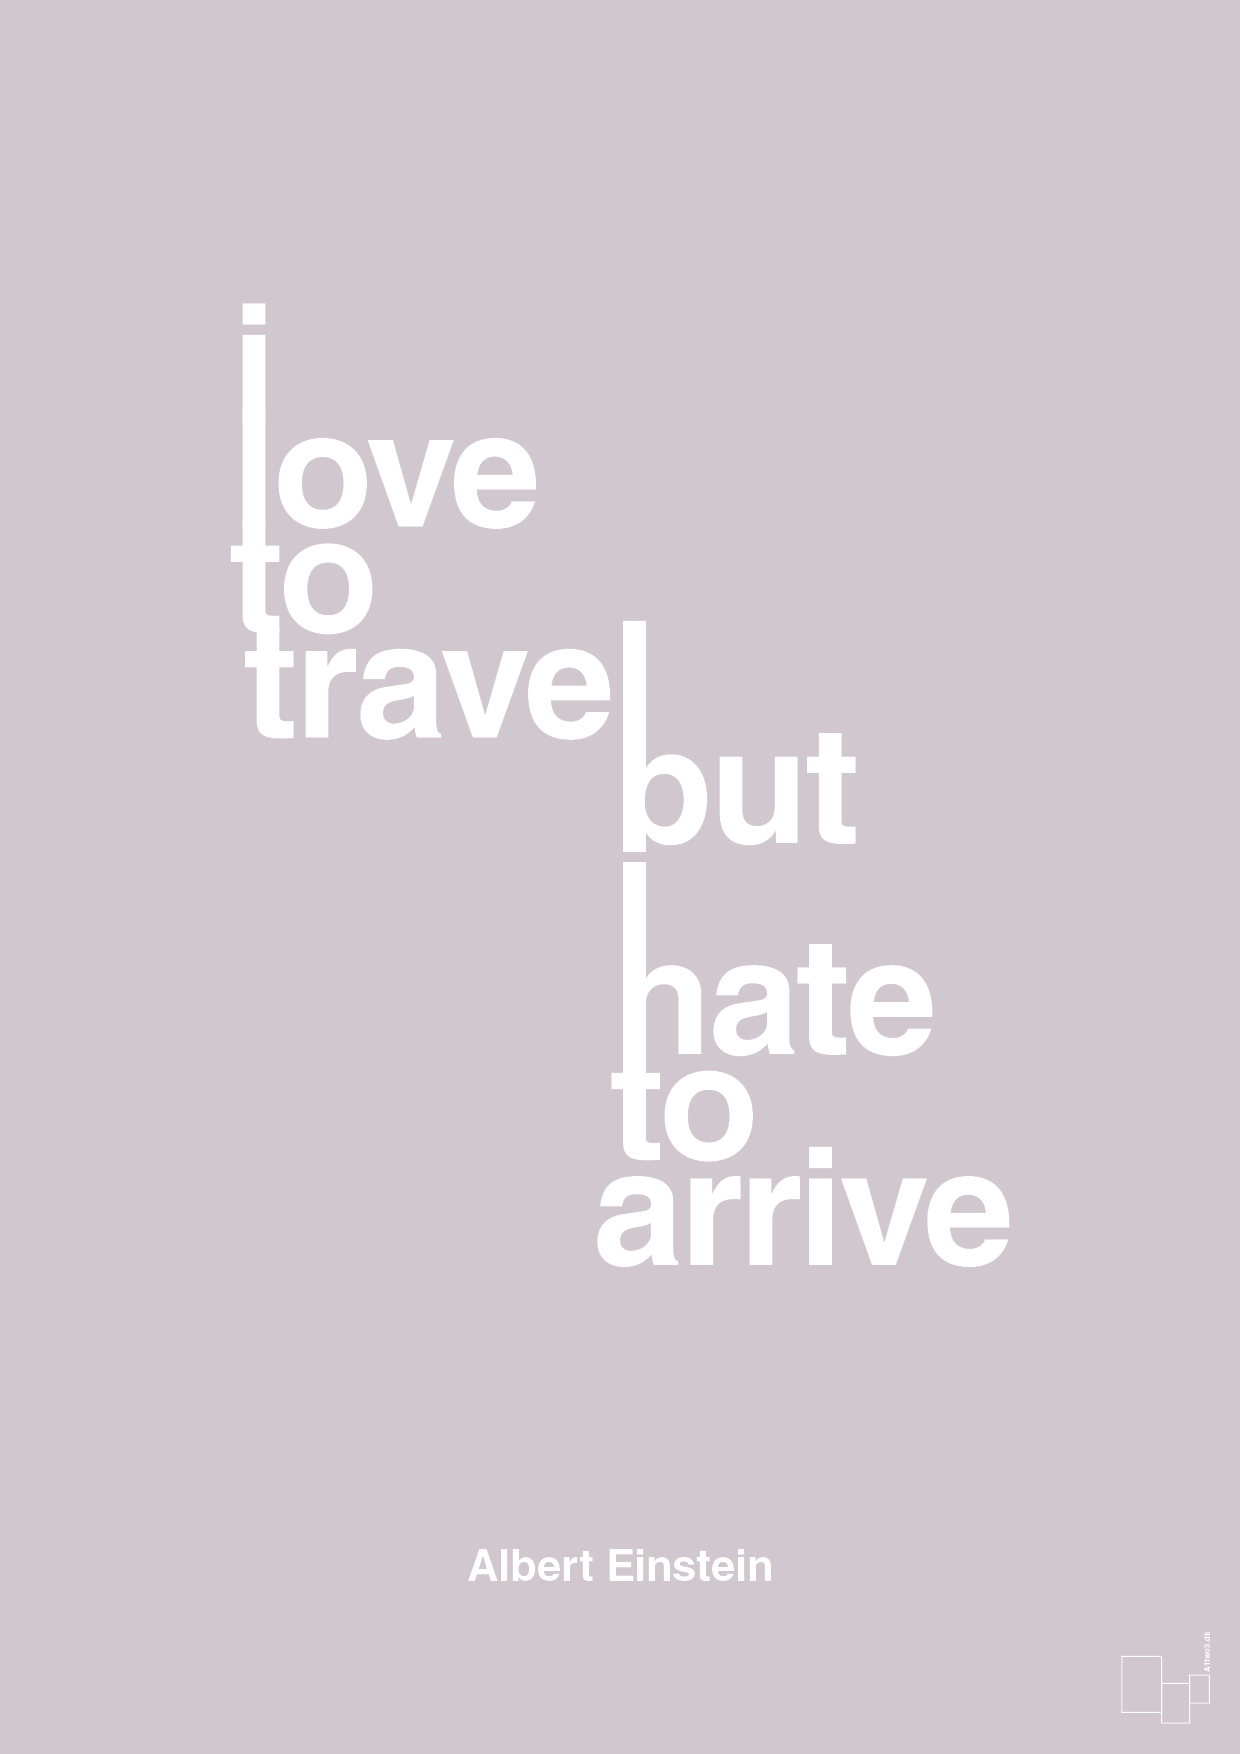 i love to travel but hate to arrive - Plakat med Citater i Dusty Lilac